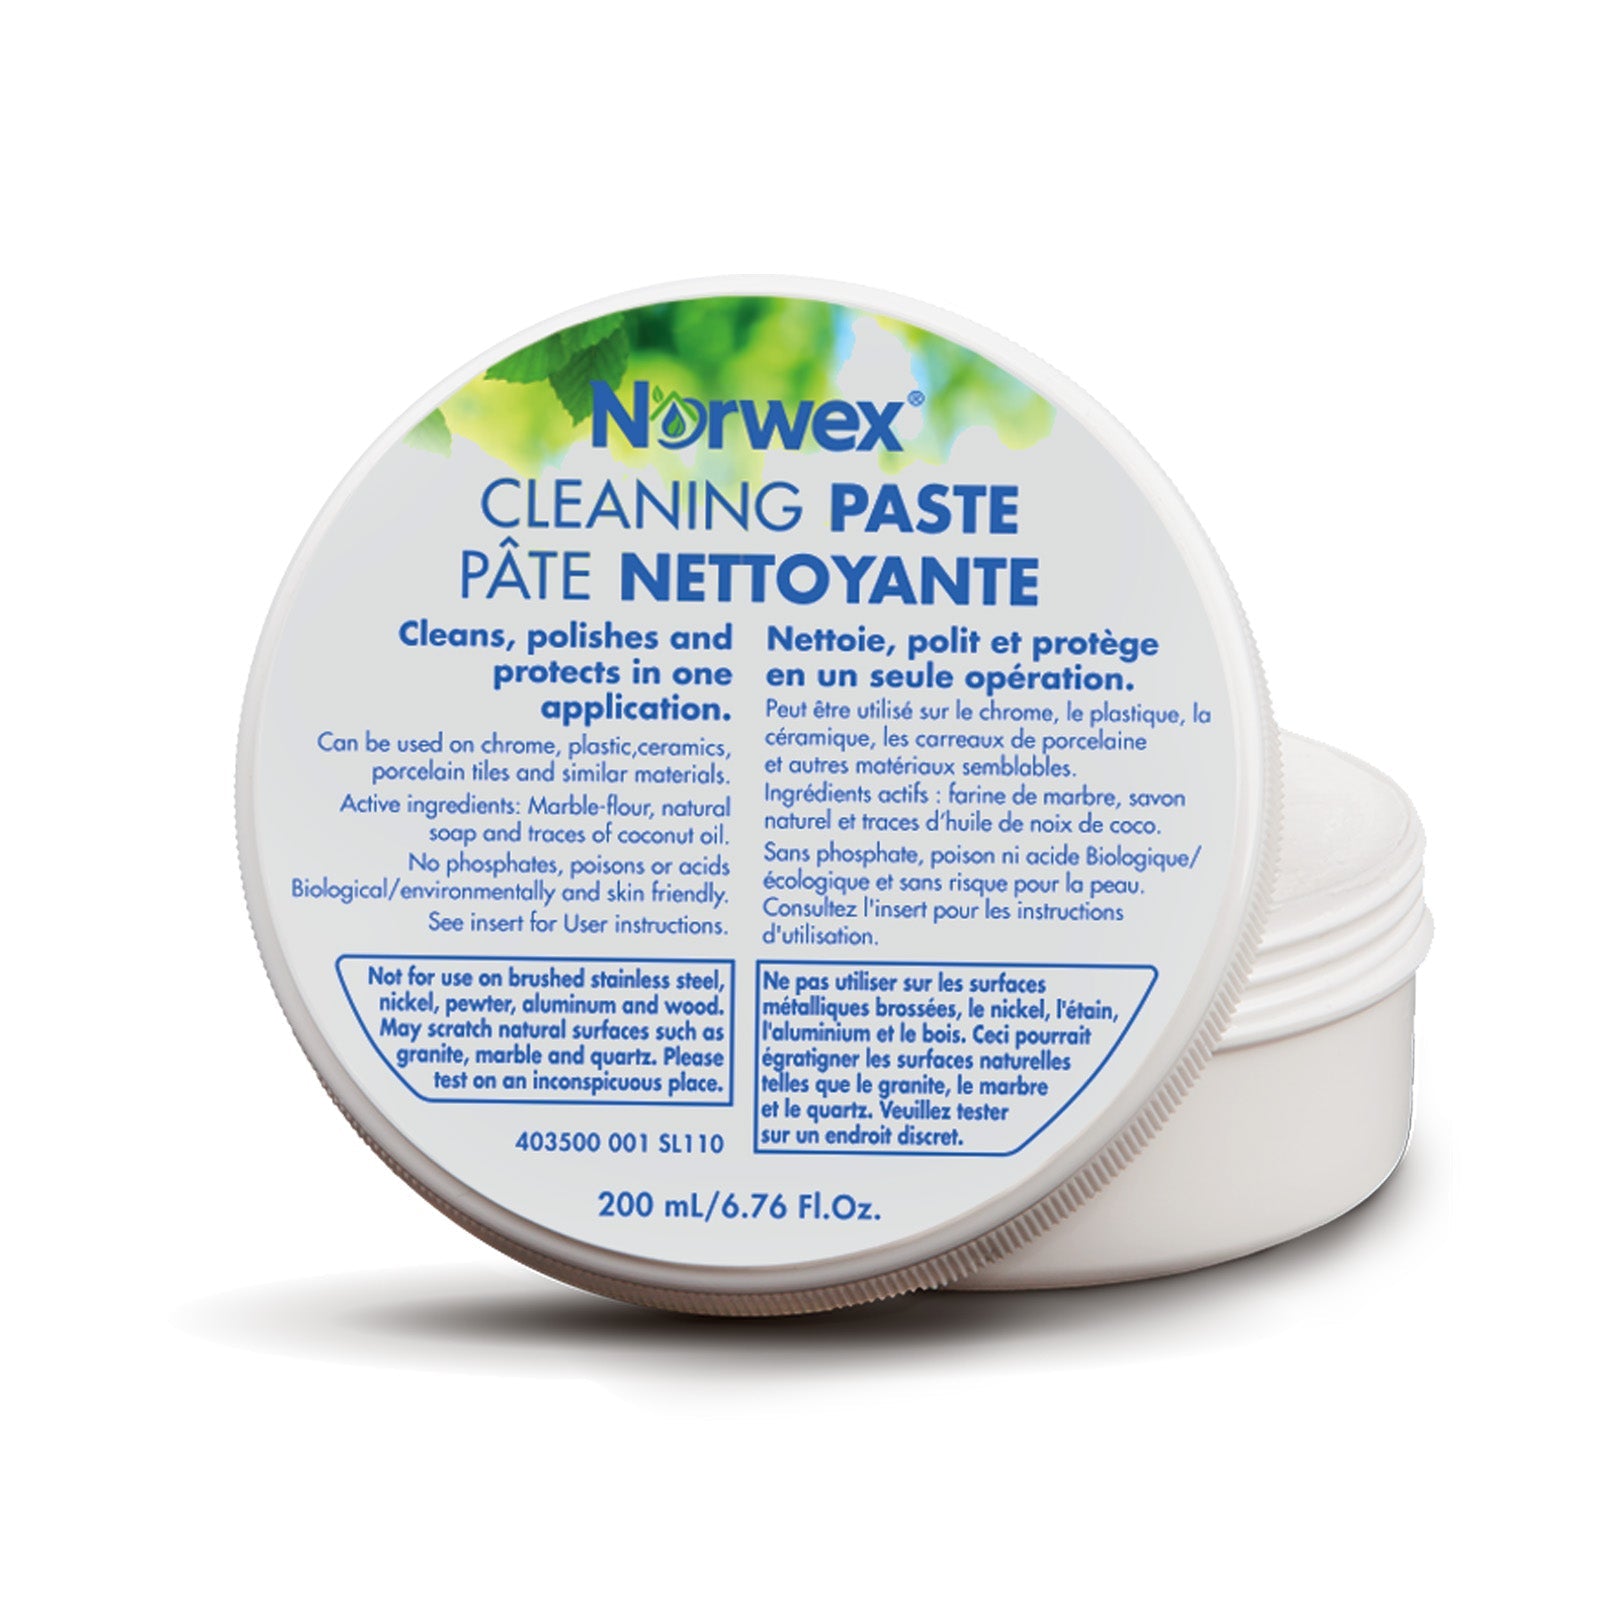 Cleaning Paste – Norwex Norge AS